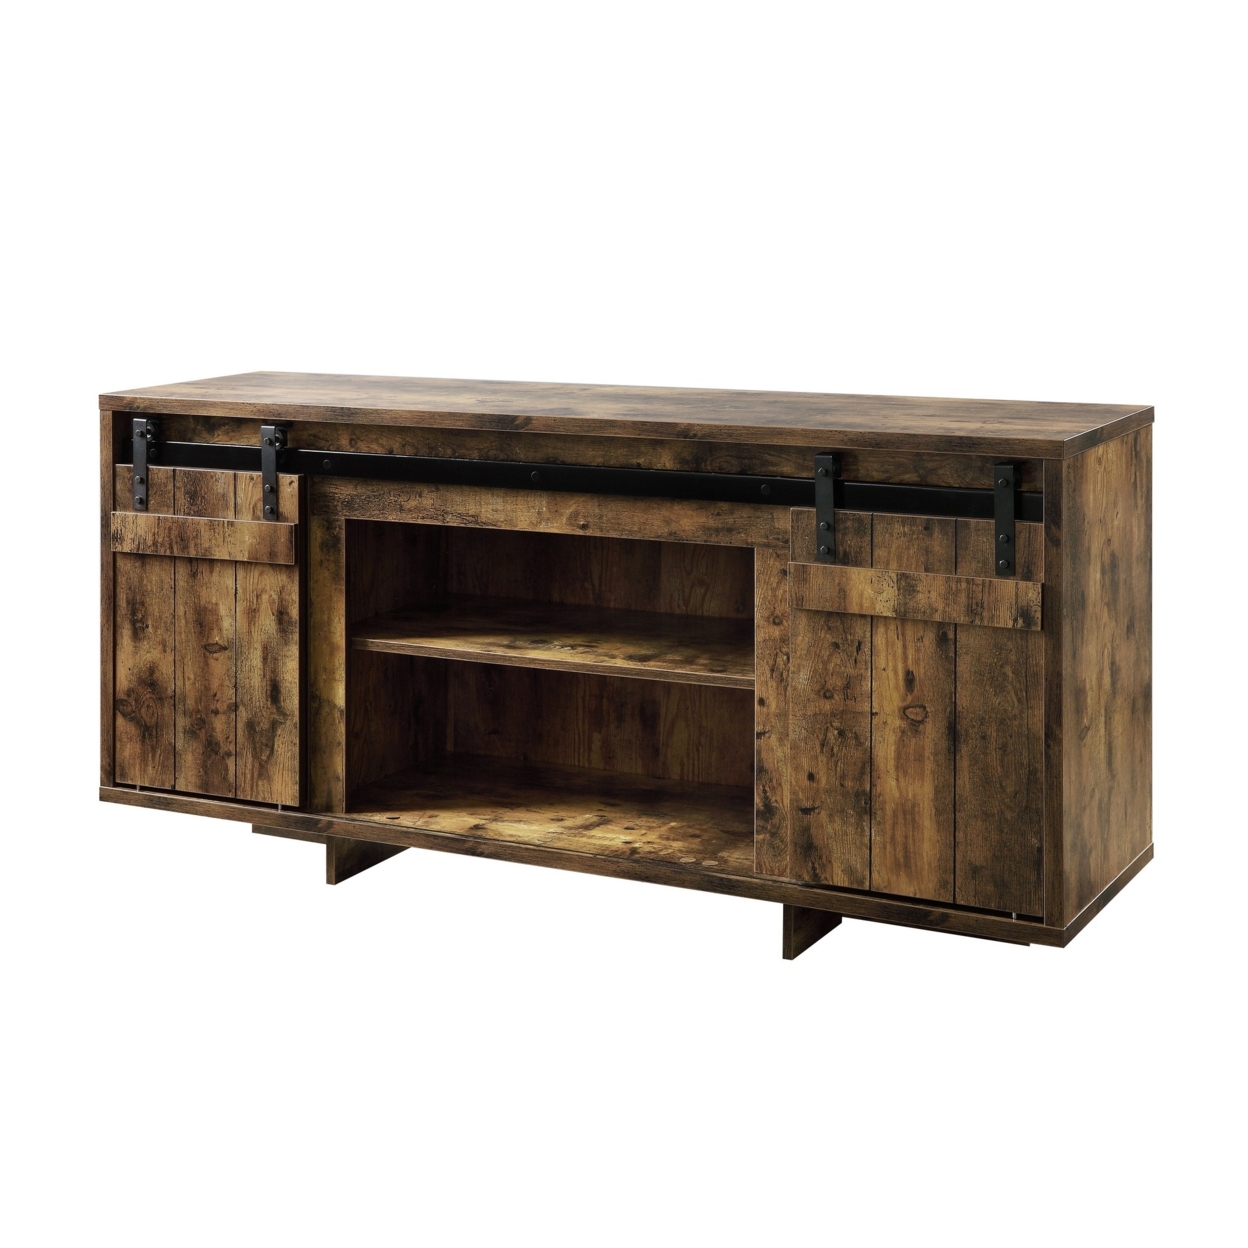 60 Inches Wooden TV Stand With 2 Barn Sliding Doors, Rustic Brown- Saltoro Sherpi